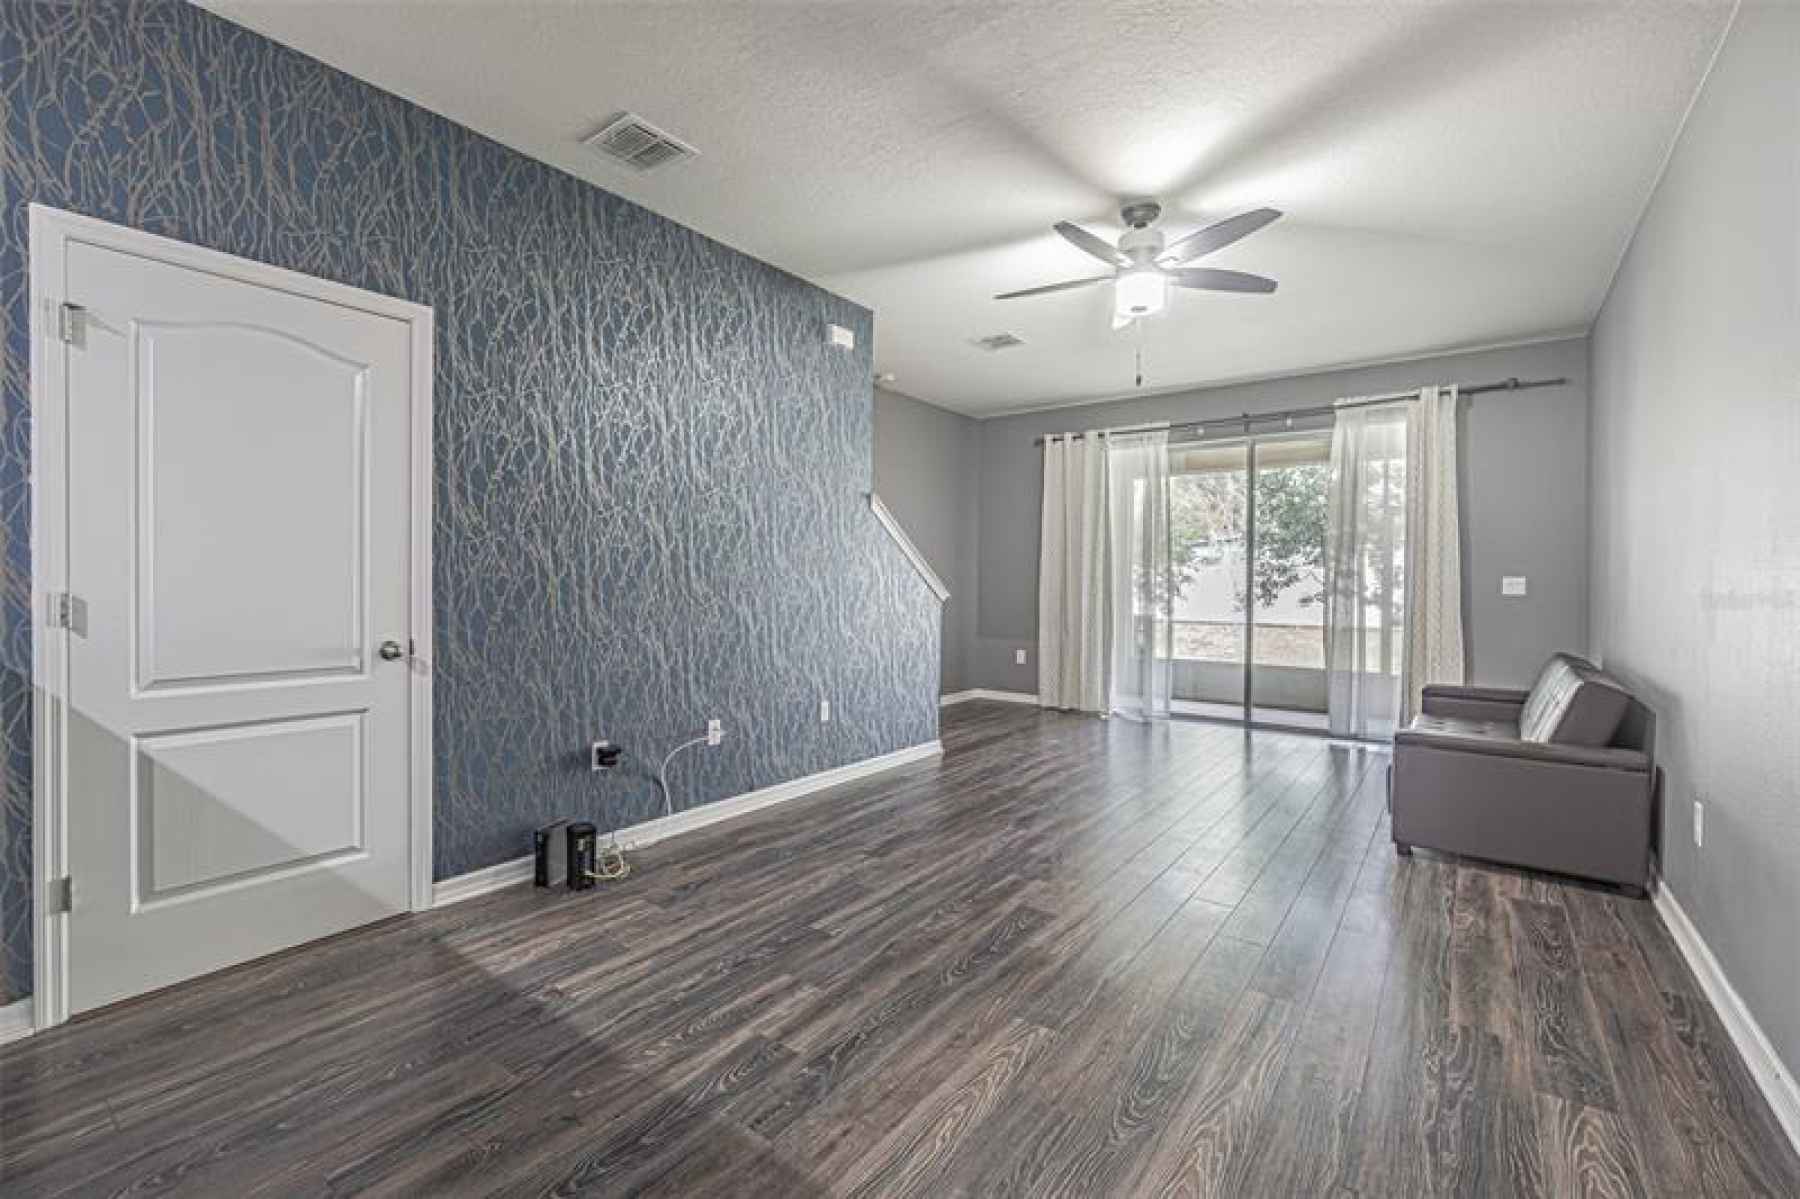 Spacious living/dining room combination offers a comfortable open concept floor plan.